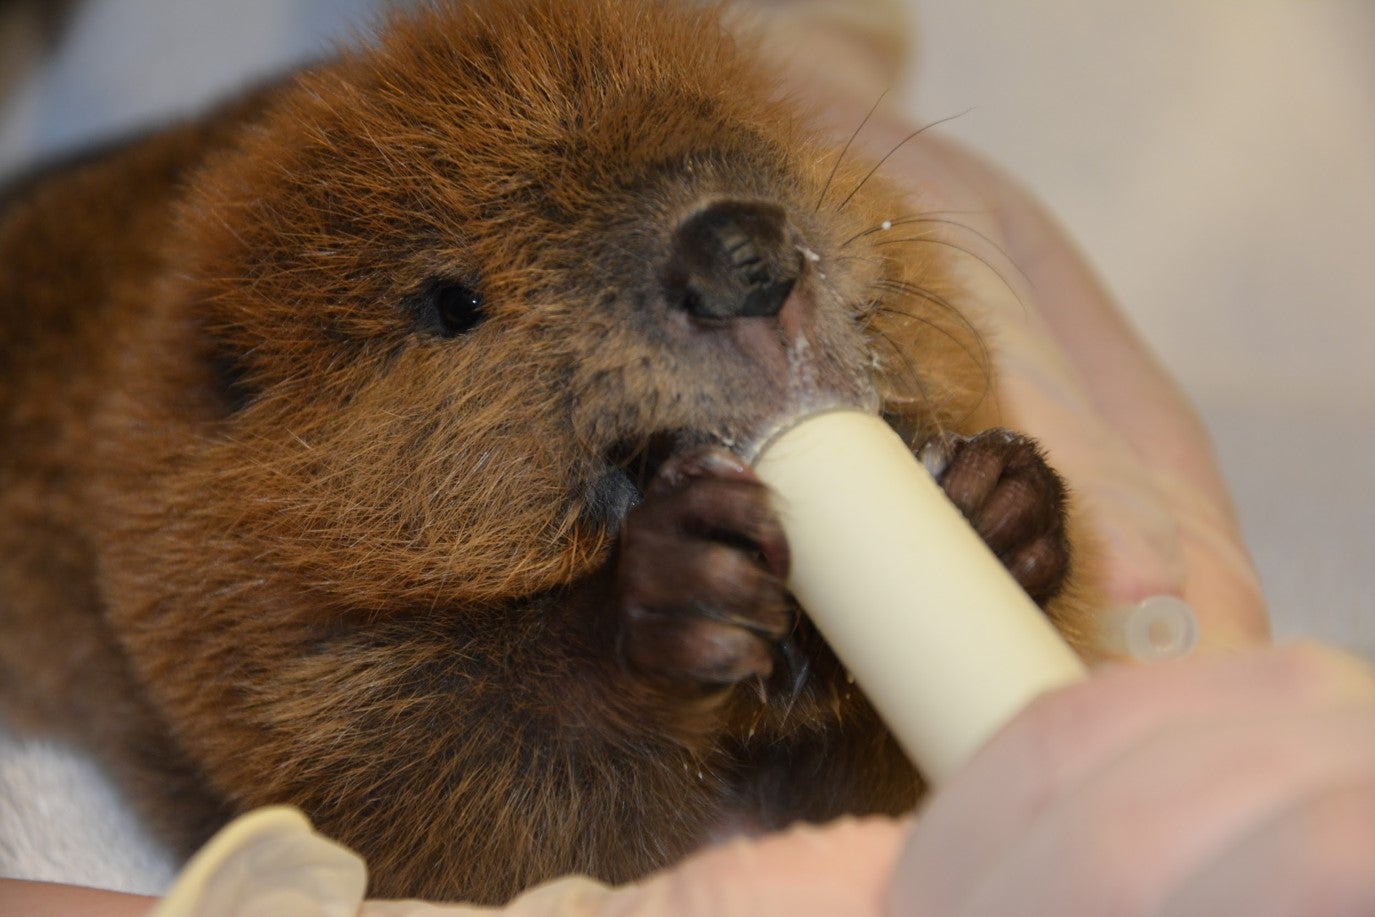 Baby beaver being fed from a bottle, photo